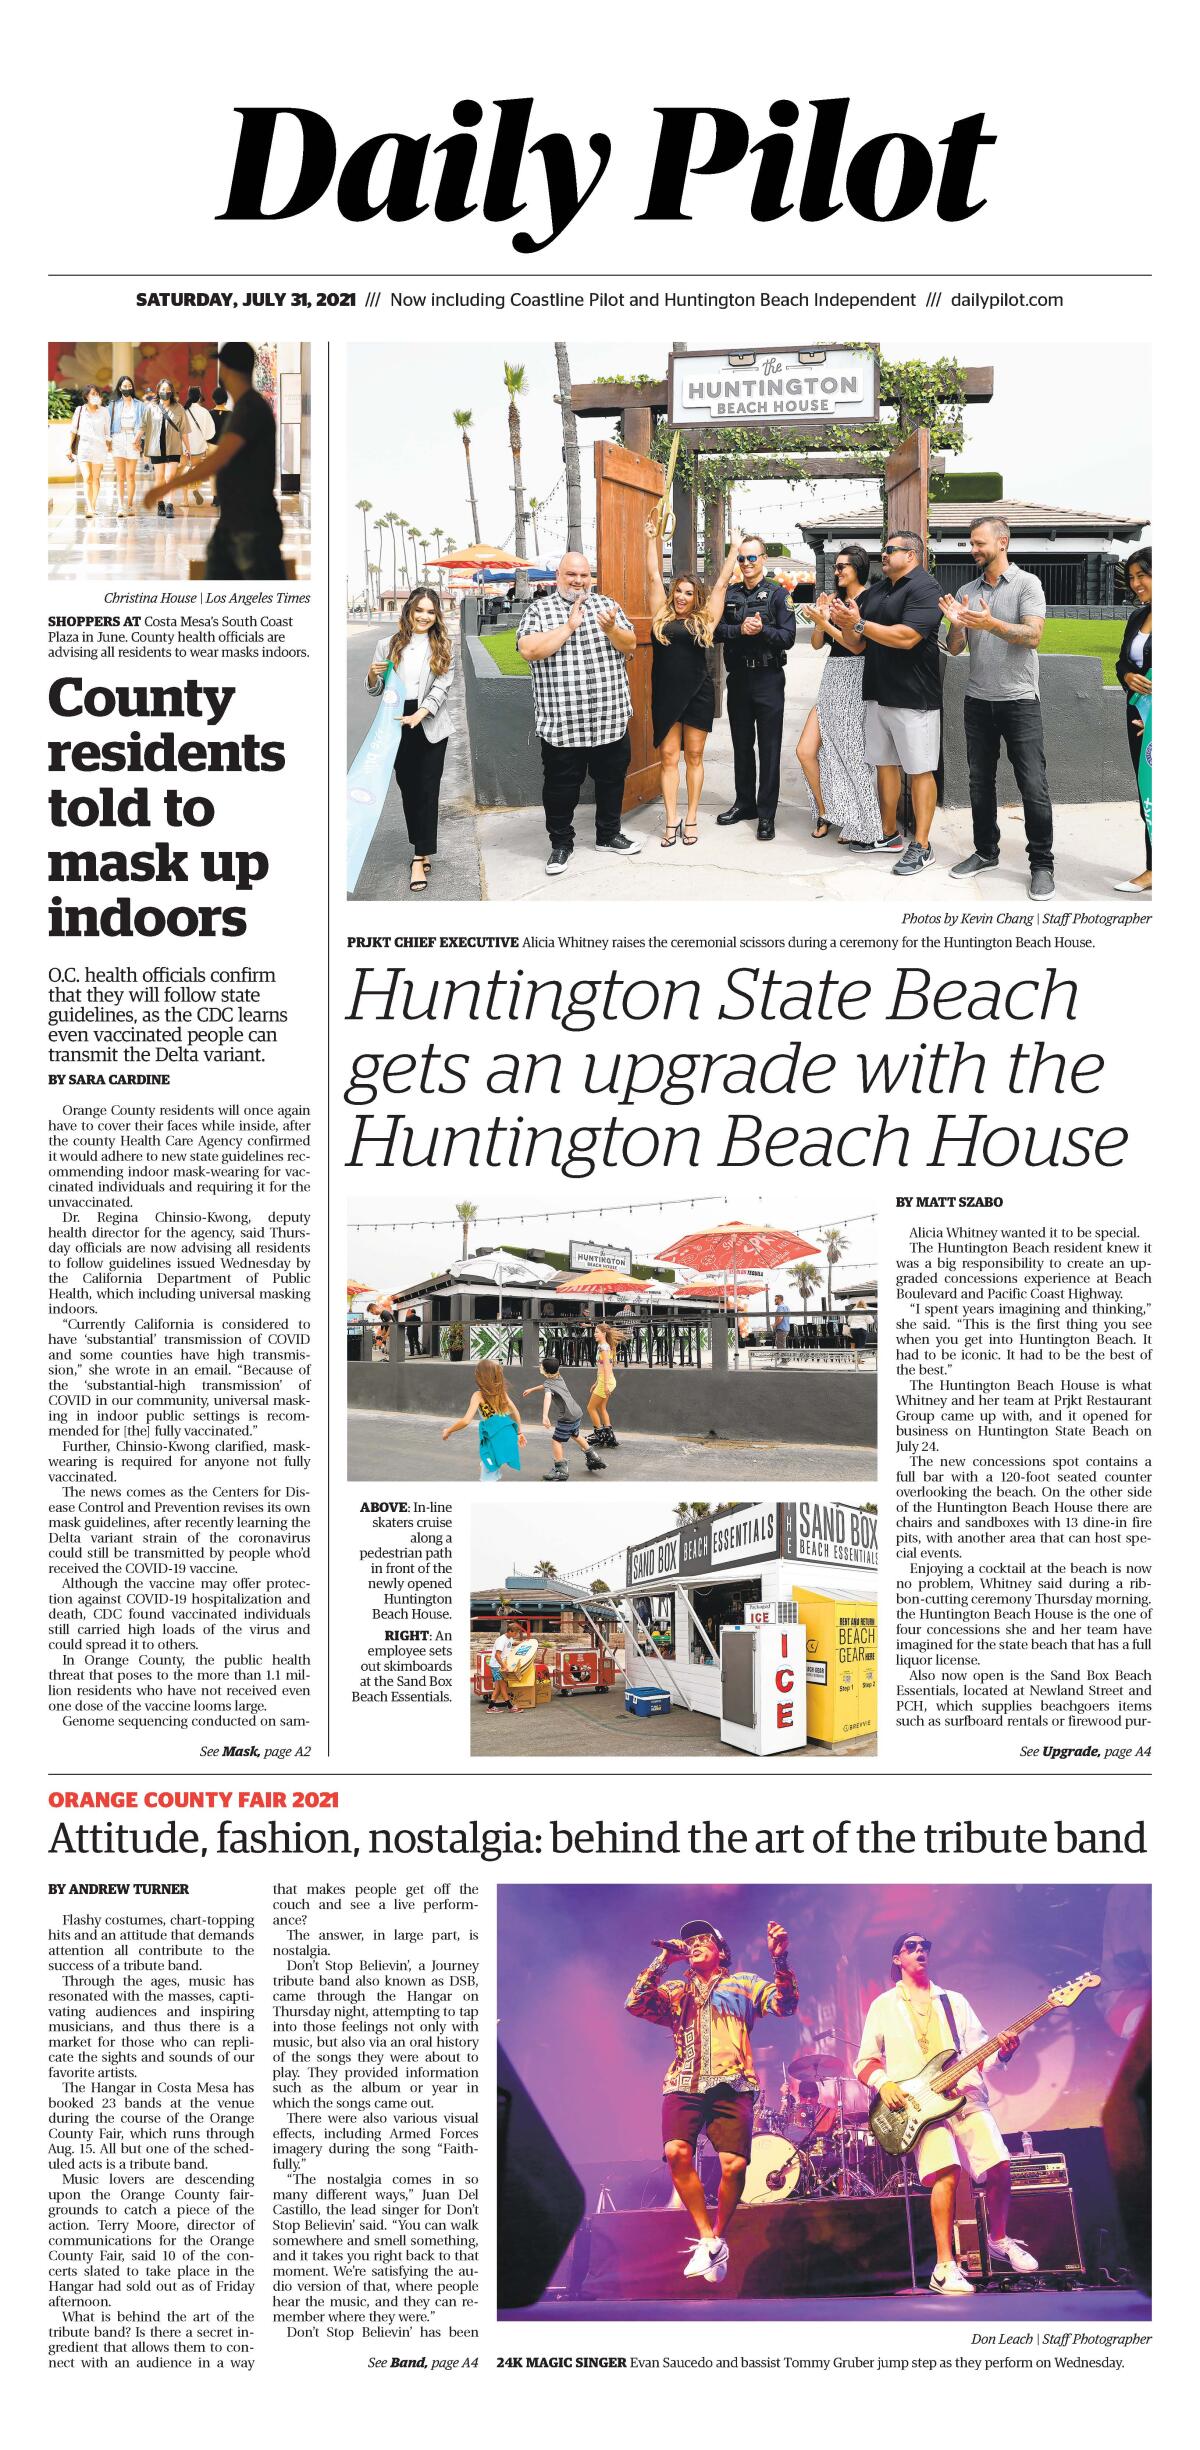 Front page of Daily Pilot e-newspaper for Saturday, July 31, 2021.